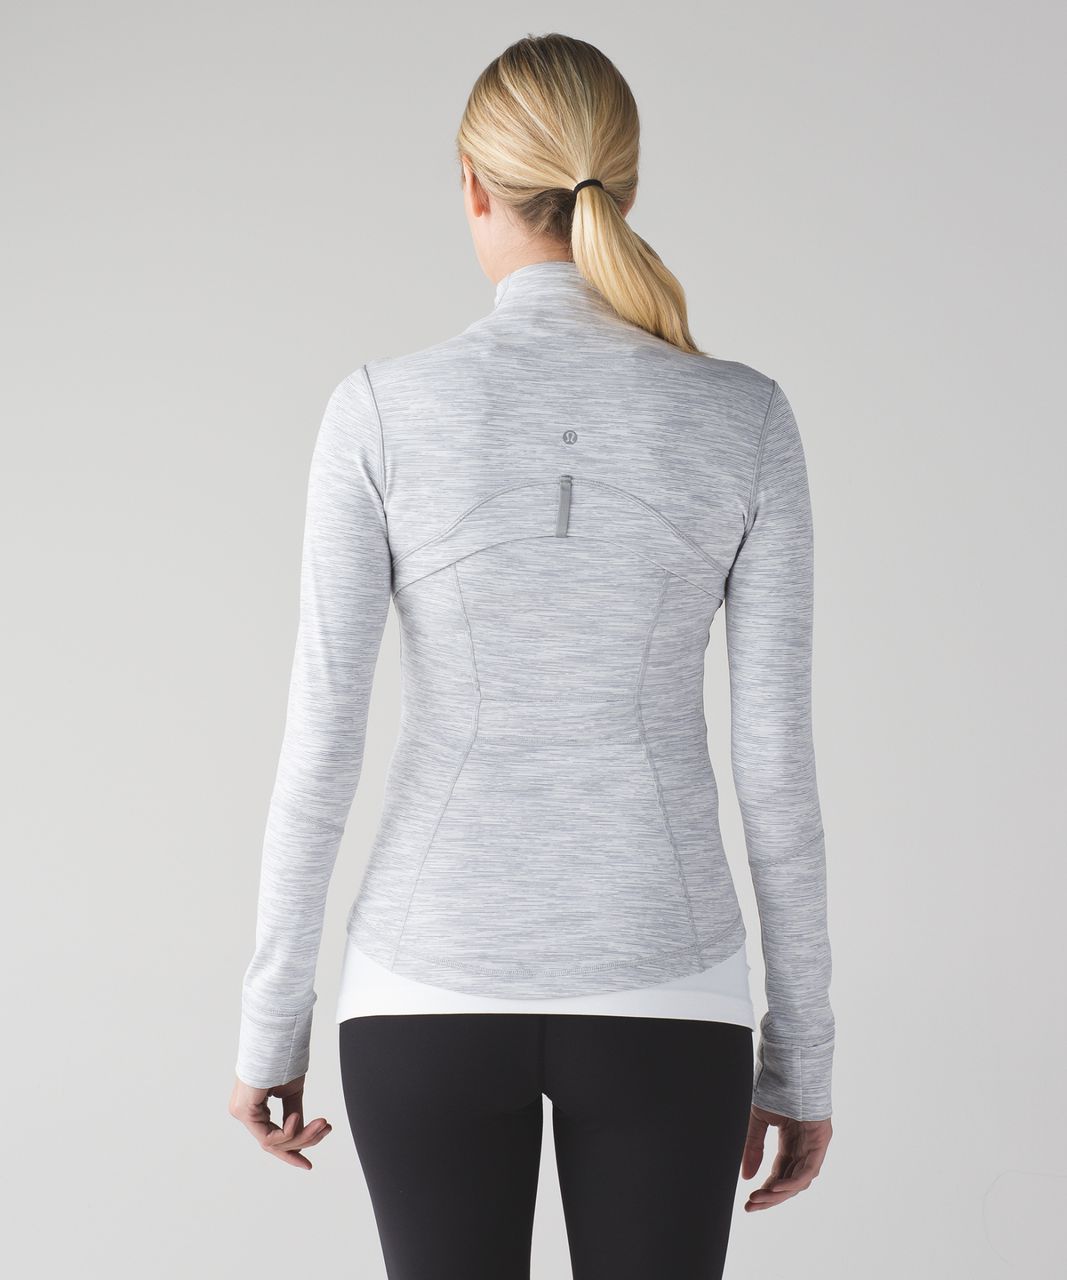 I bought my first define jacket online but i don't know if size 0 will fit?  (my measurements are 5'2 and 49kg) : r/lululemon